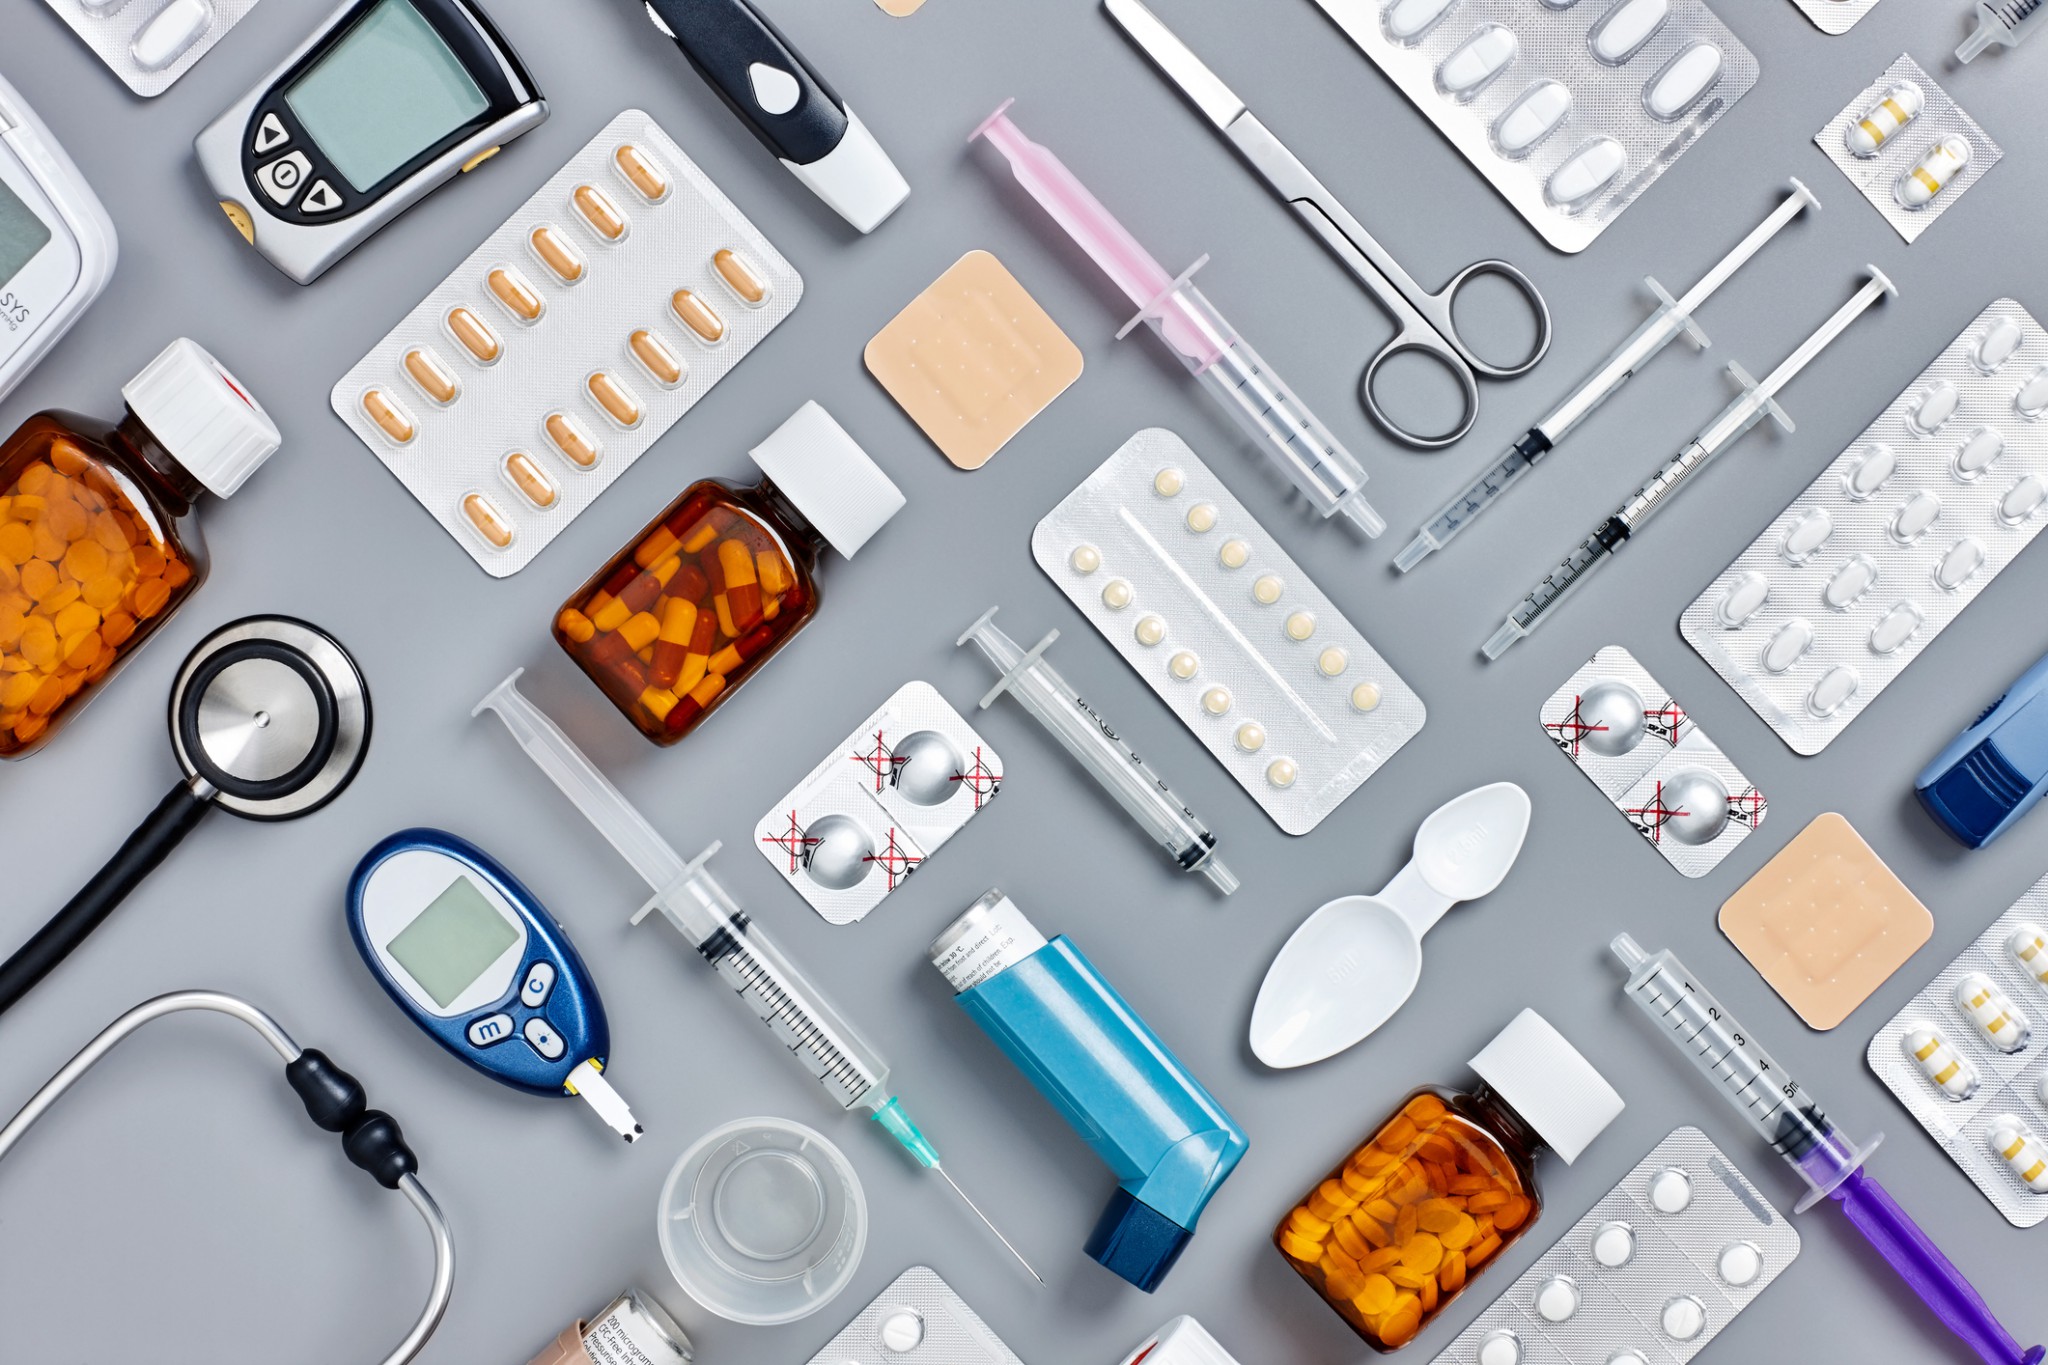 5 Things You Need to Consider When Restocking Your Healthcare Supplies